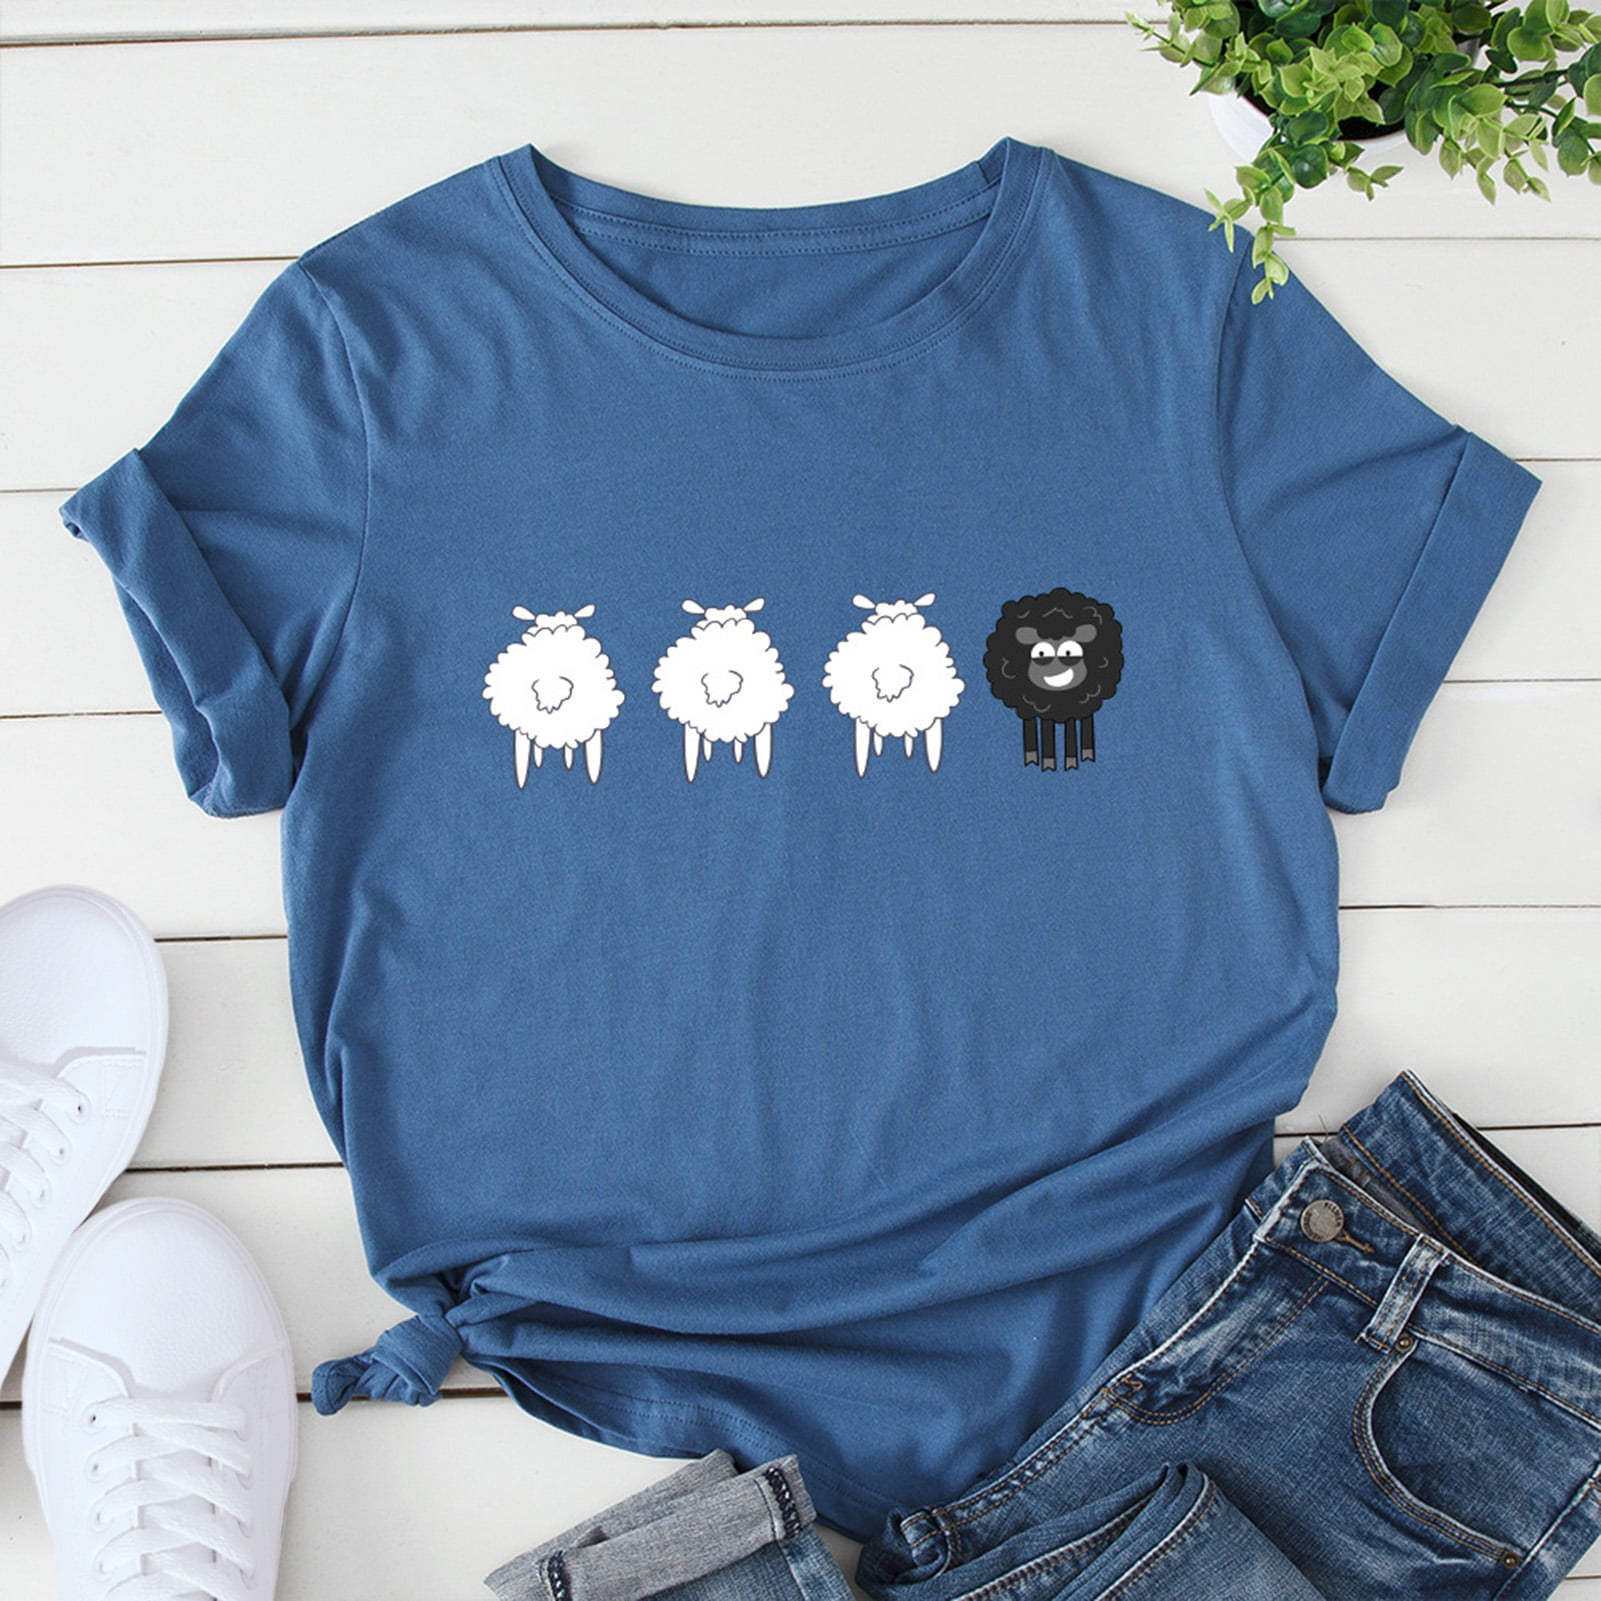 Cute Sheeps Group Hot Womens Short Sleeve Tops Loose Casual T-Shirt Blouses for Girl